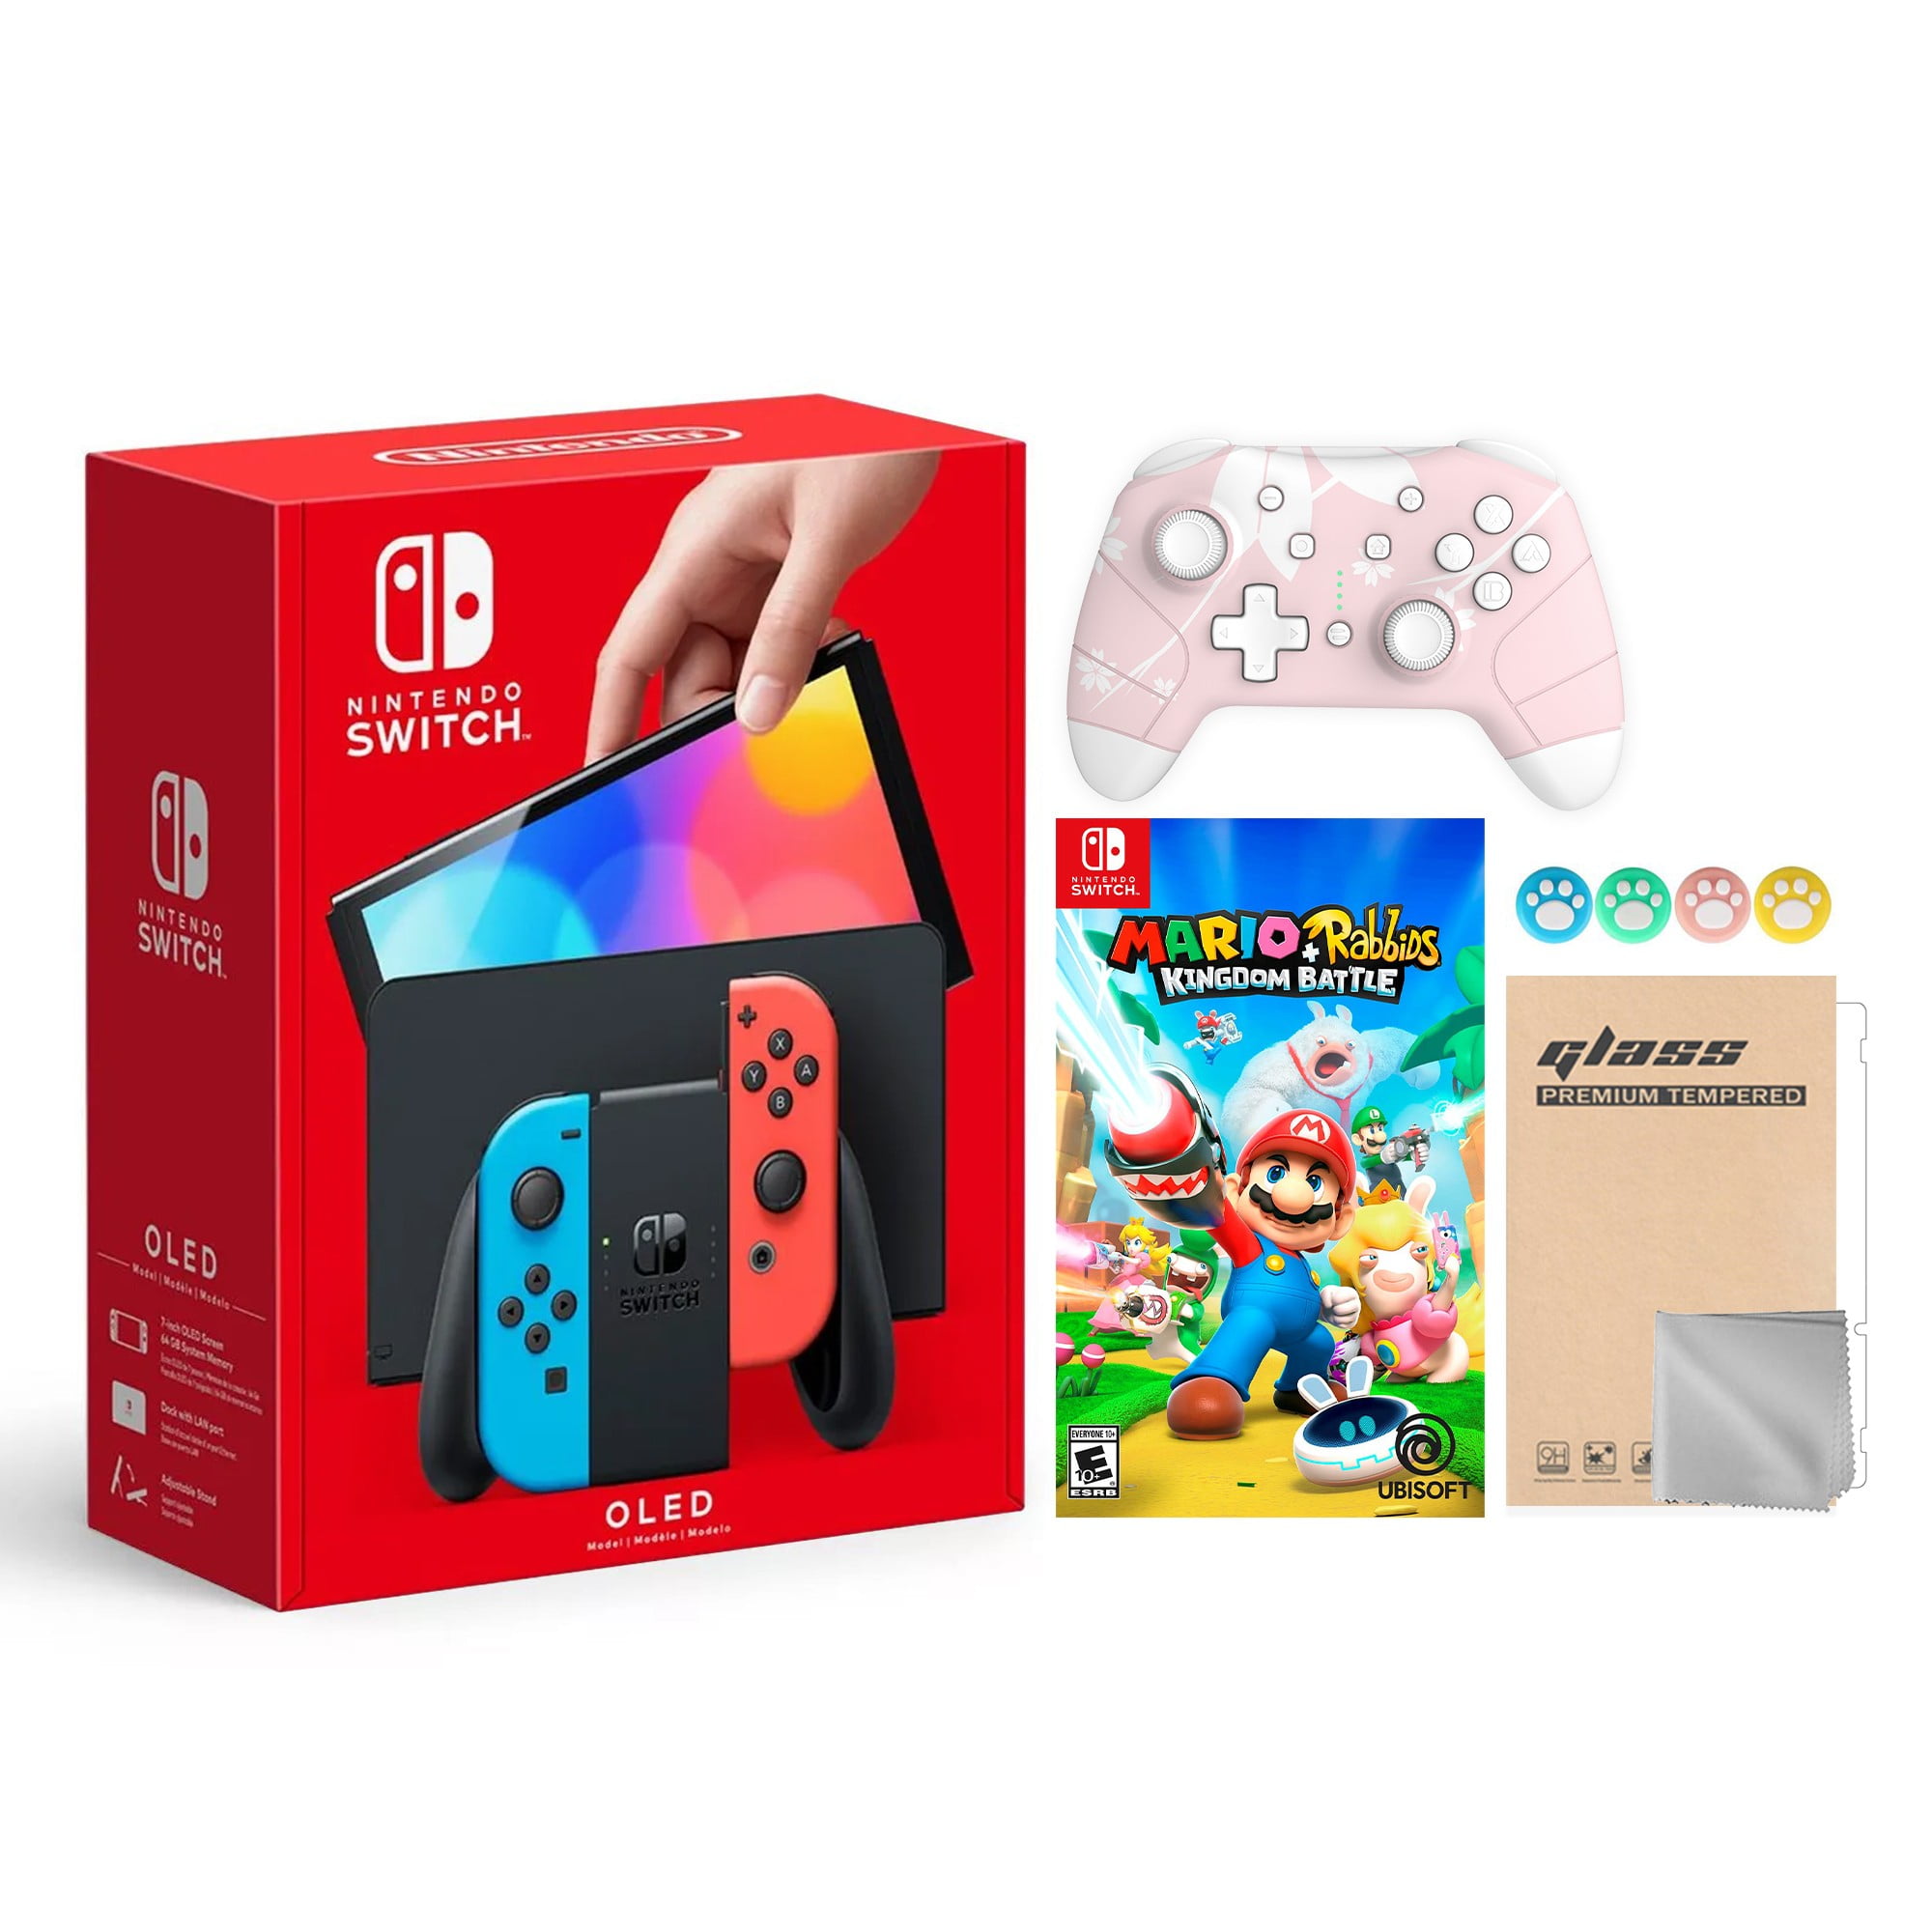 Nintendo Switch OLED White with Let's Go Pikachu, 128GB Card 